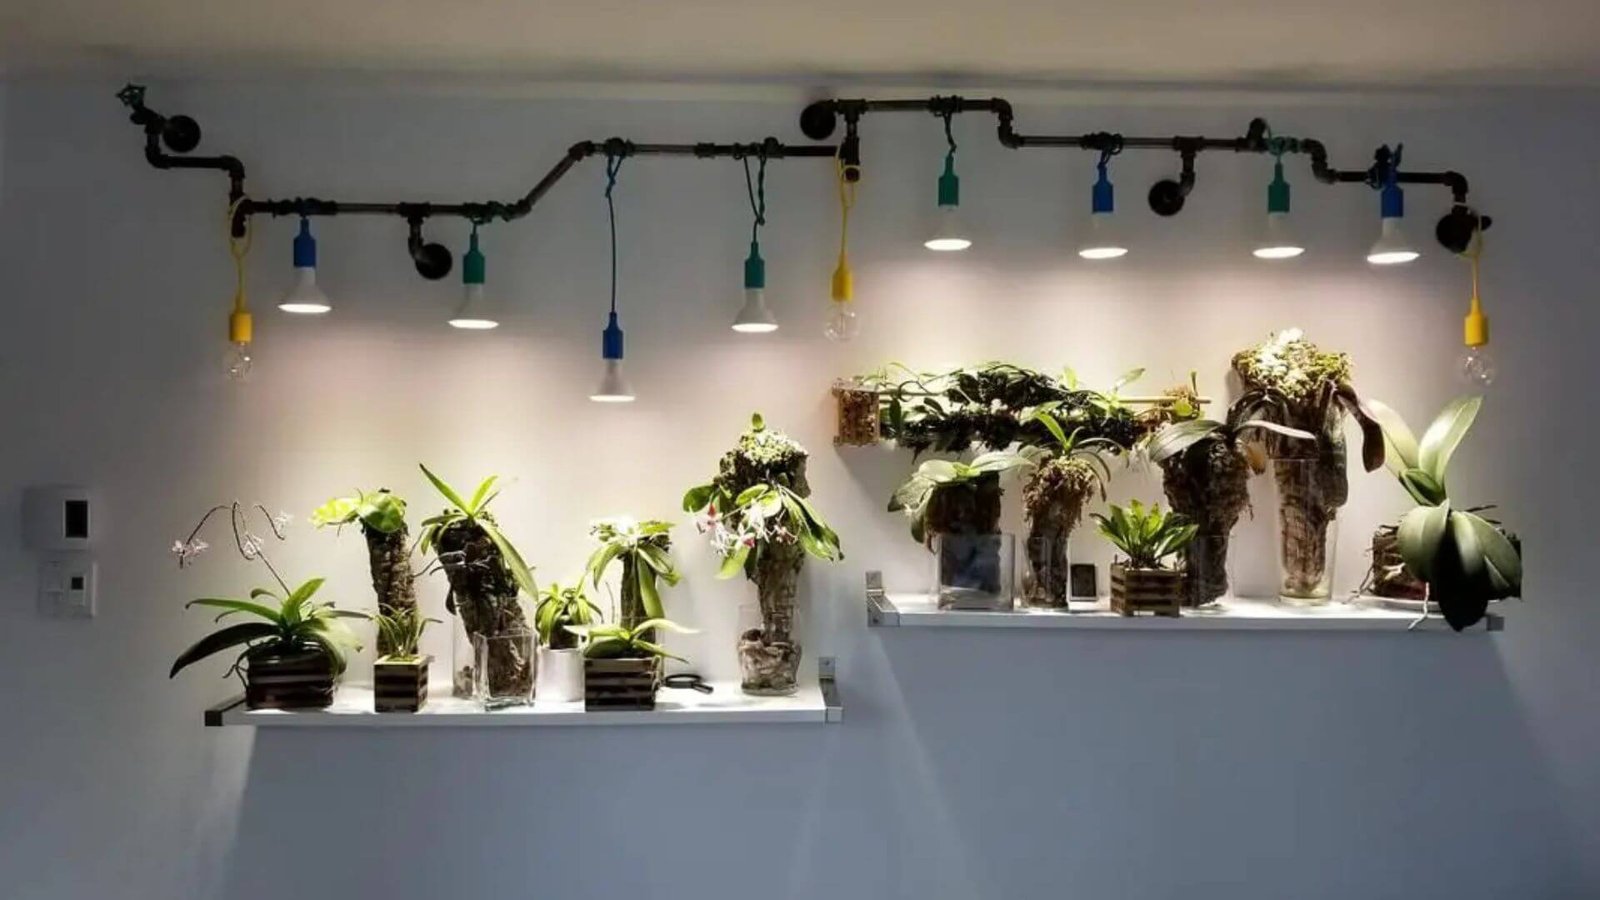 How to Create the perfect lighting environment for indoor gardening